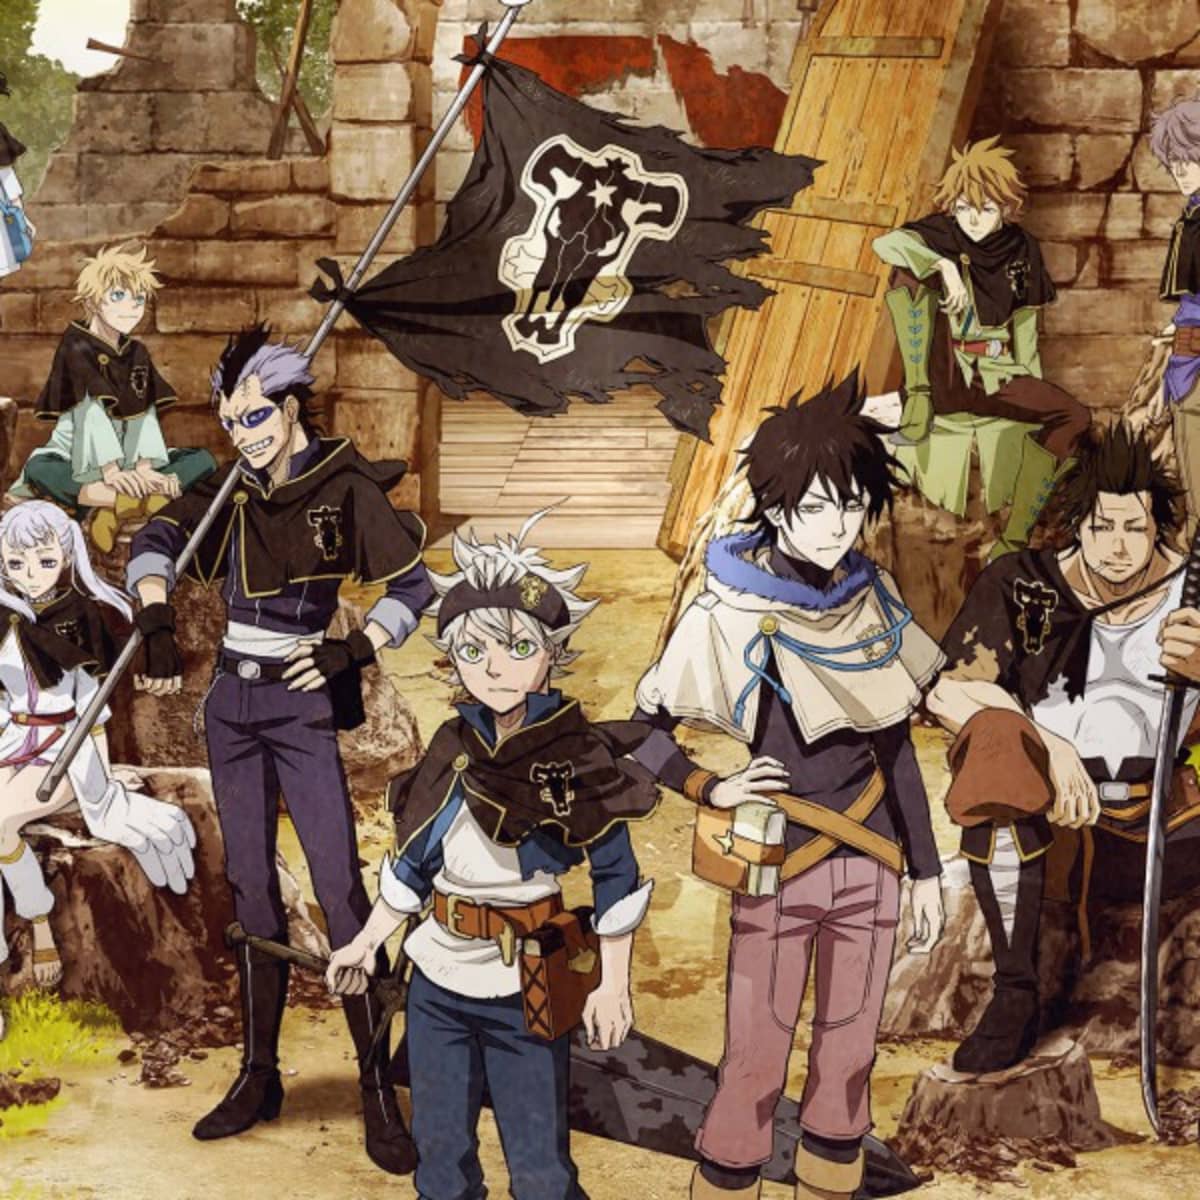 1440x900 4k Black Clover Anime Wallpaper,1440x900 Resolution HD 4k  Wallpapers,Images,Backgrounds,Photos and Pictures